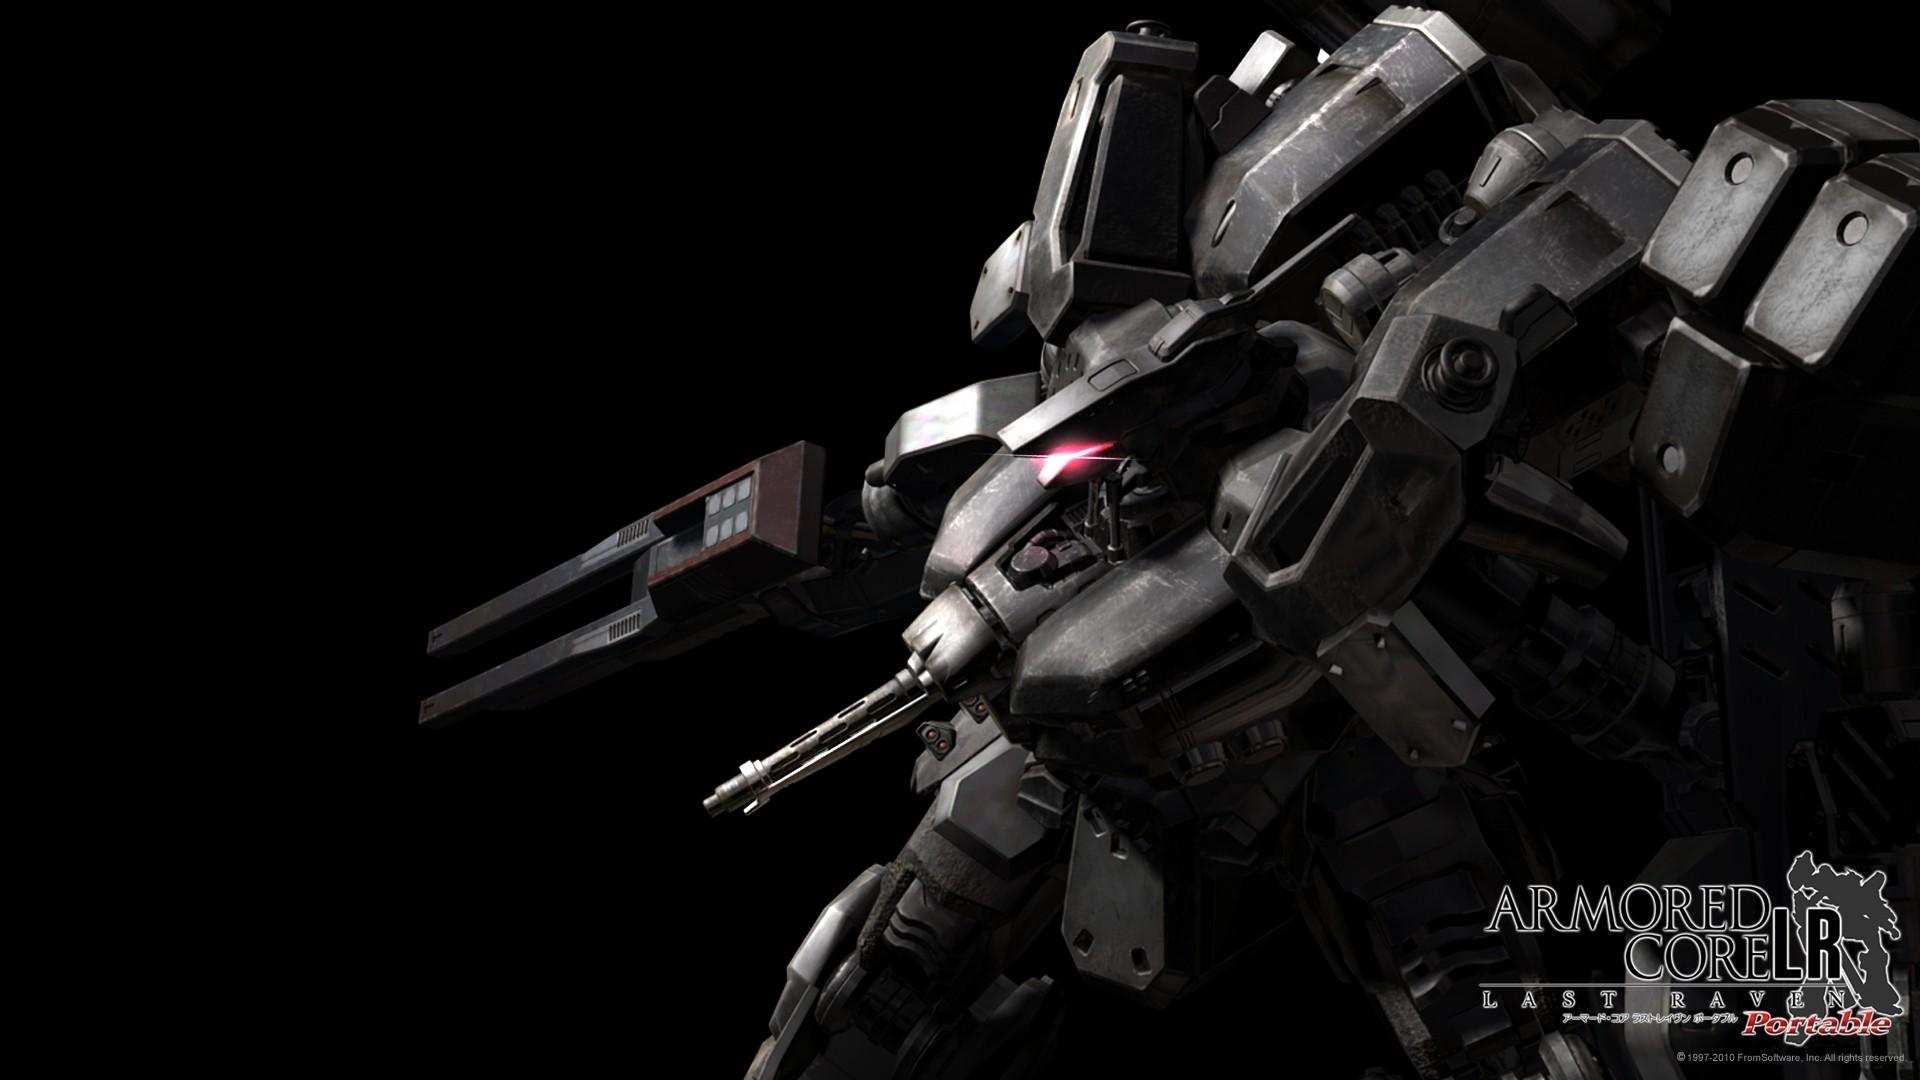 HD Armored Core Wallpaper Amazing Image Cool Background Photo